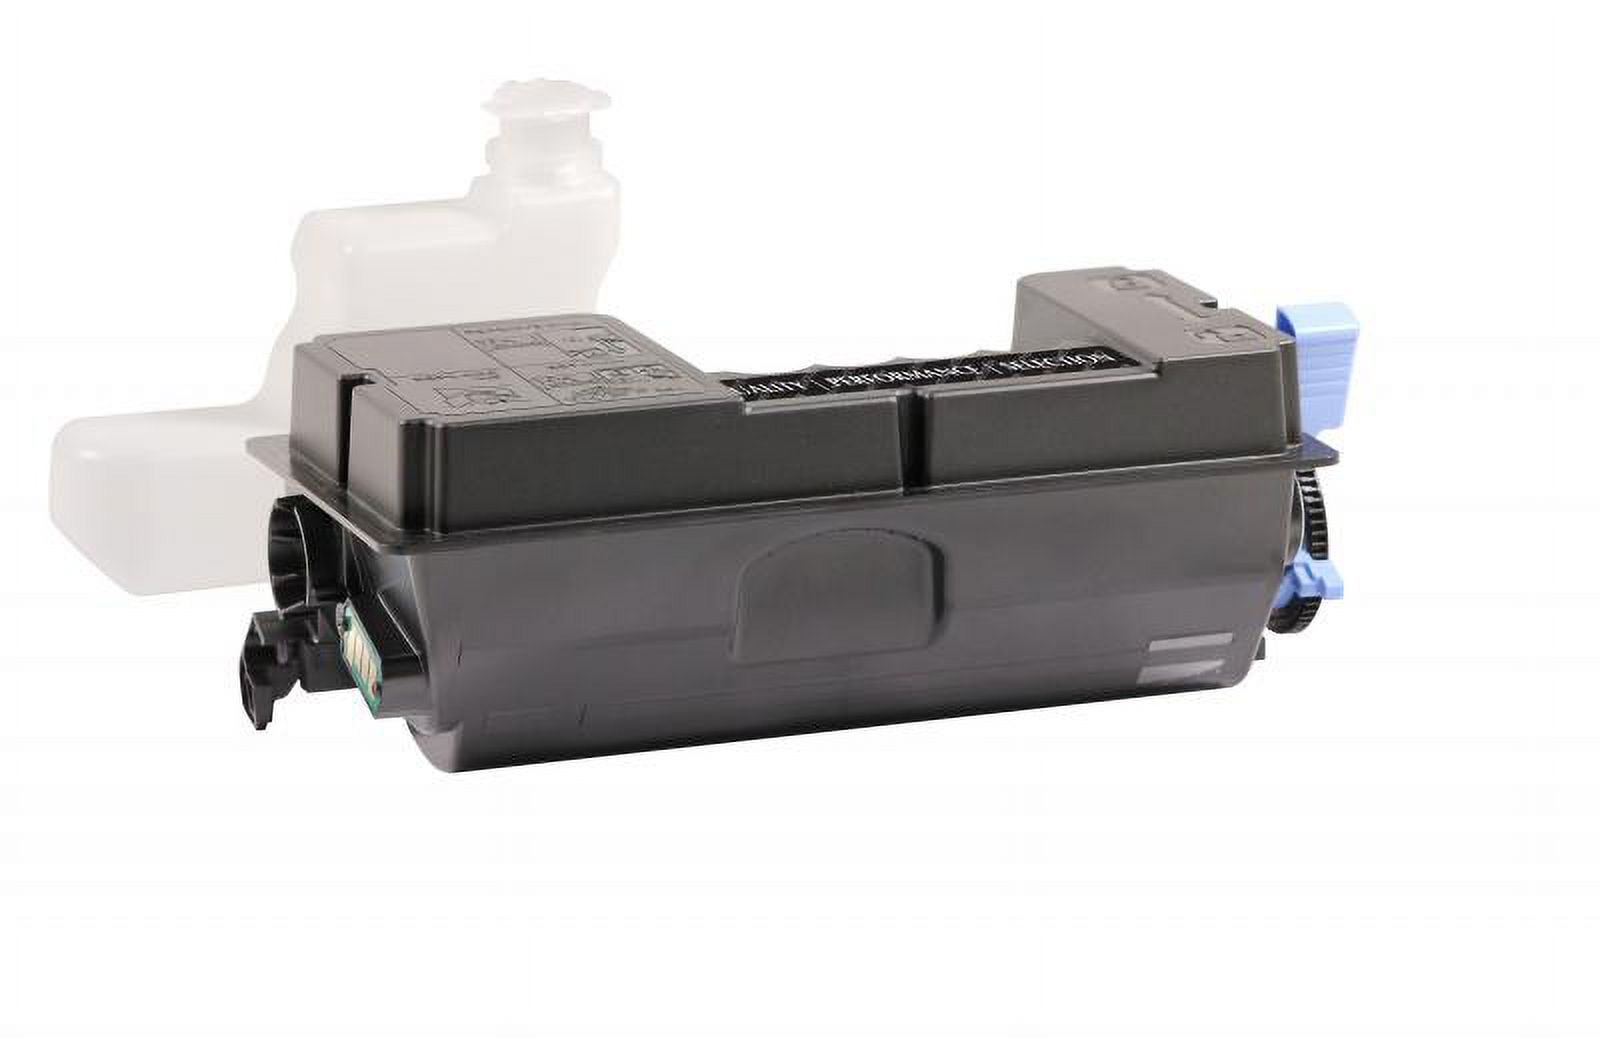 Picture of CIG 201008 Non-New Toner Cartridge for Kyocera TK-3112